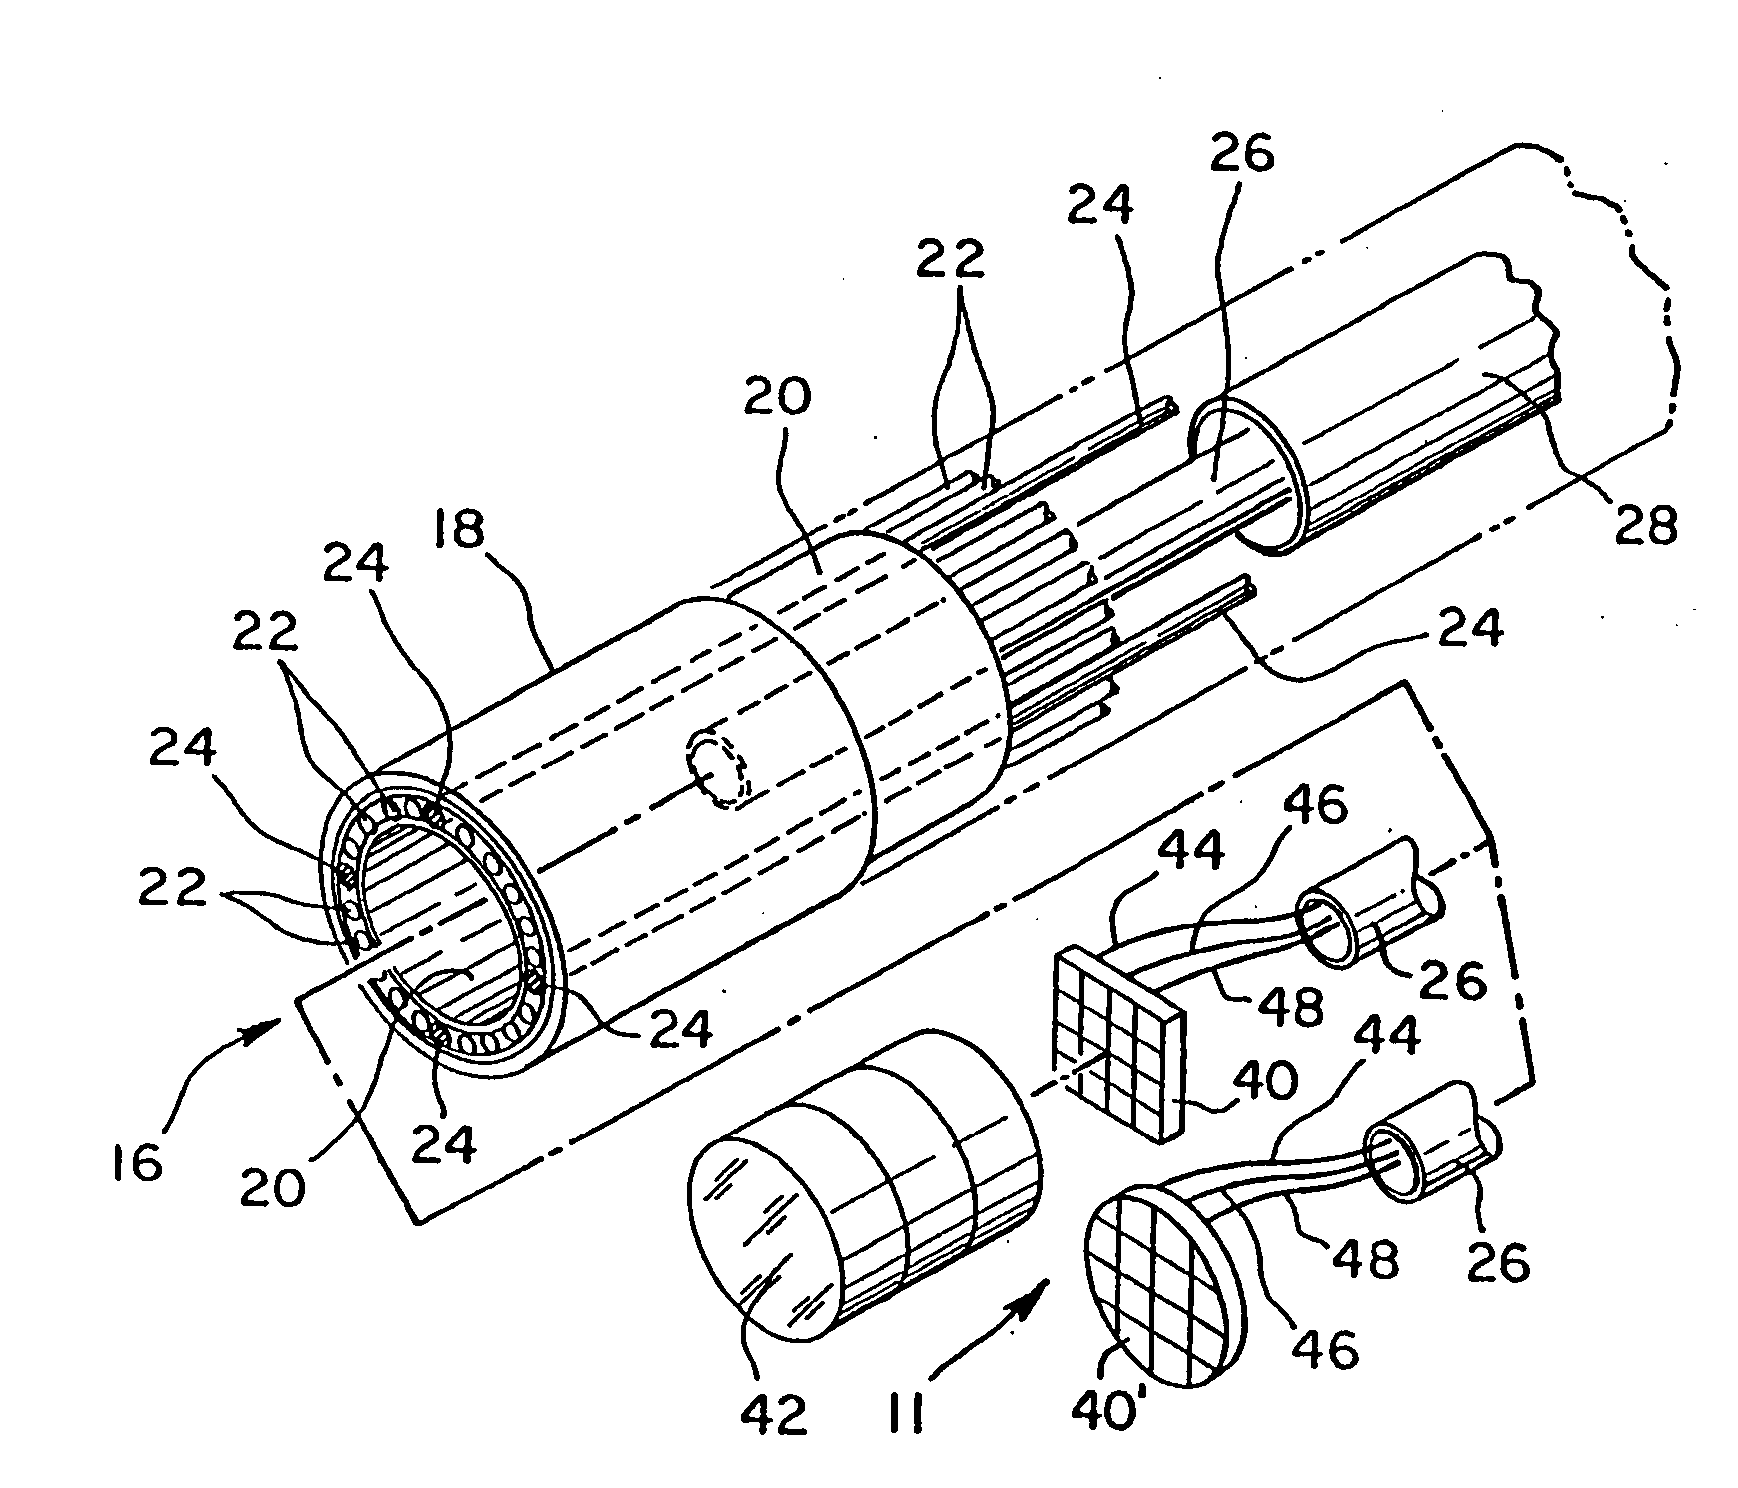 Reduced area imaging device incorporated within wireless endoscopic devices